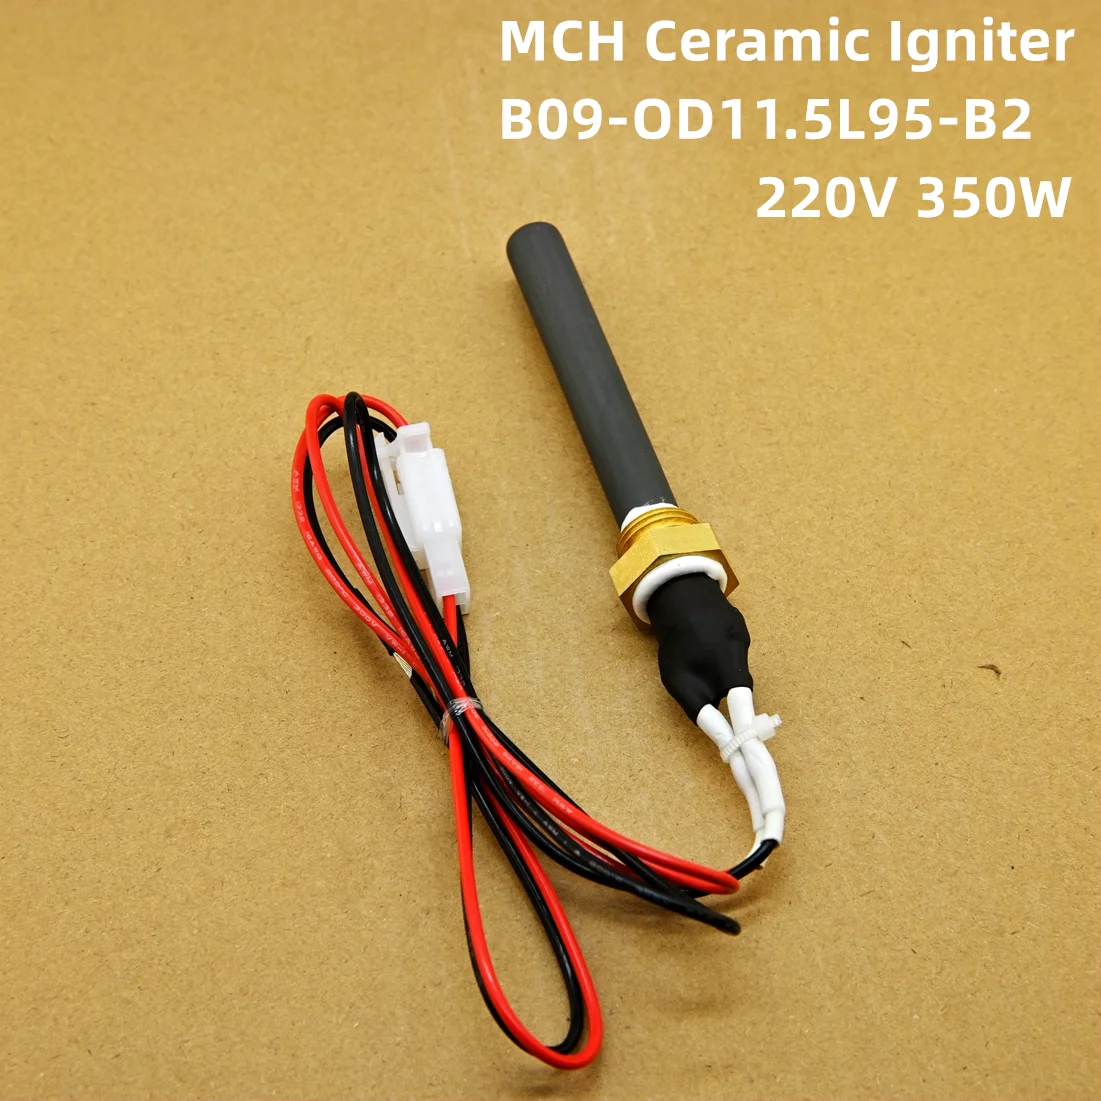 220V 350W pellet stove Igniter BBQ ceramic ignition rod for fast ignition, safety and energy-saving G3/8 screw